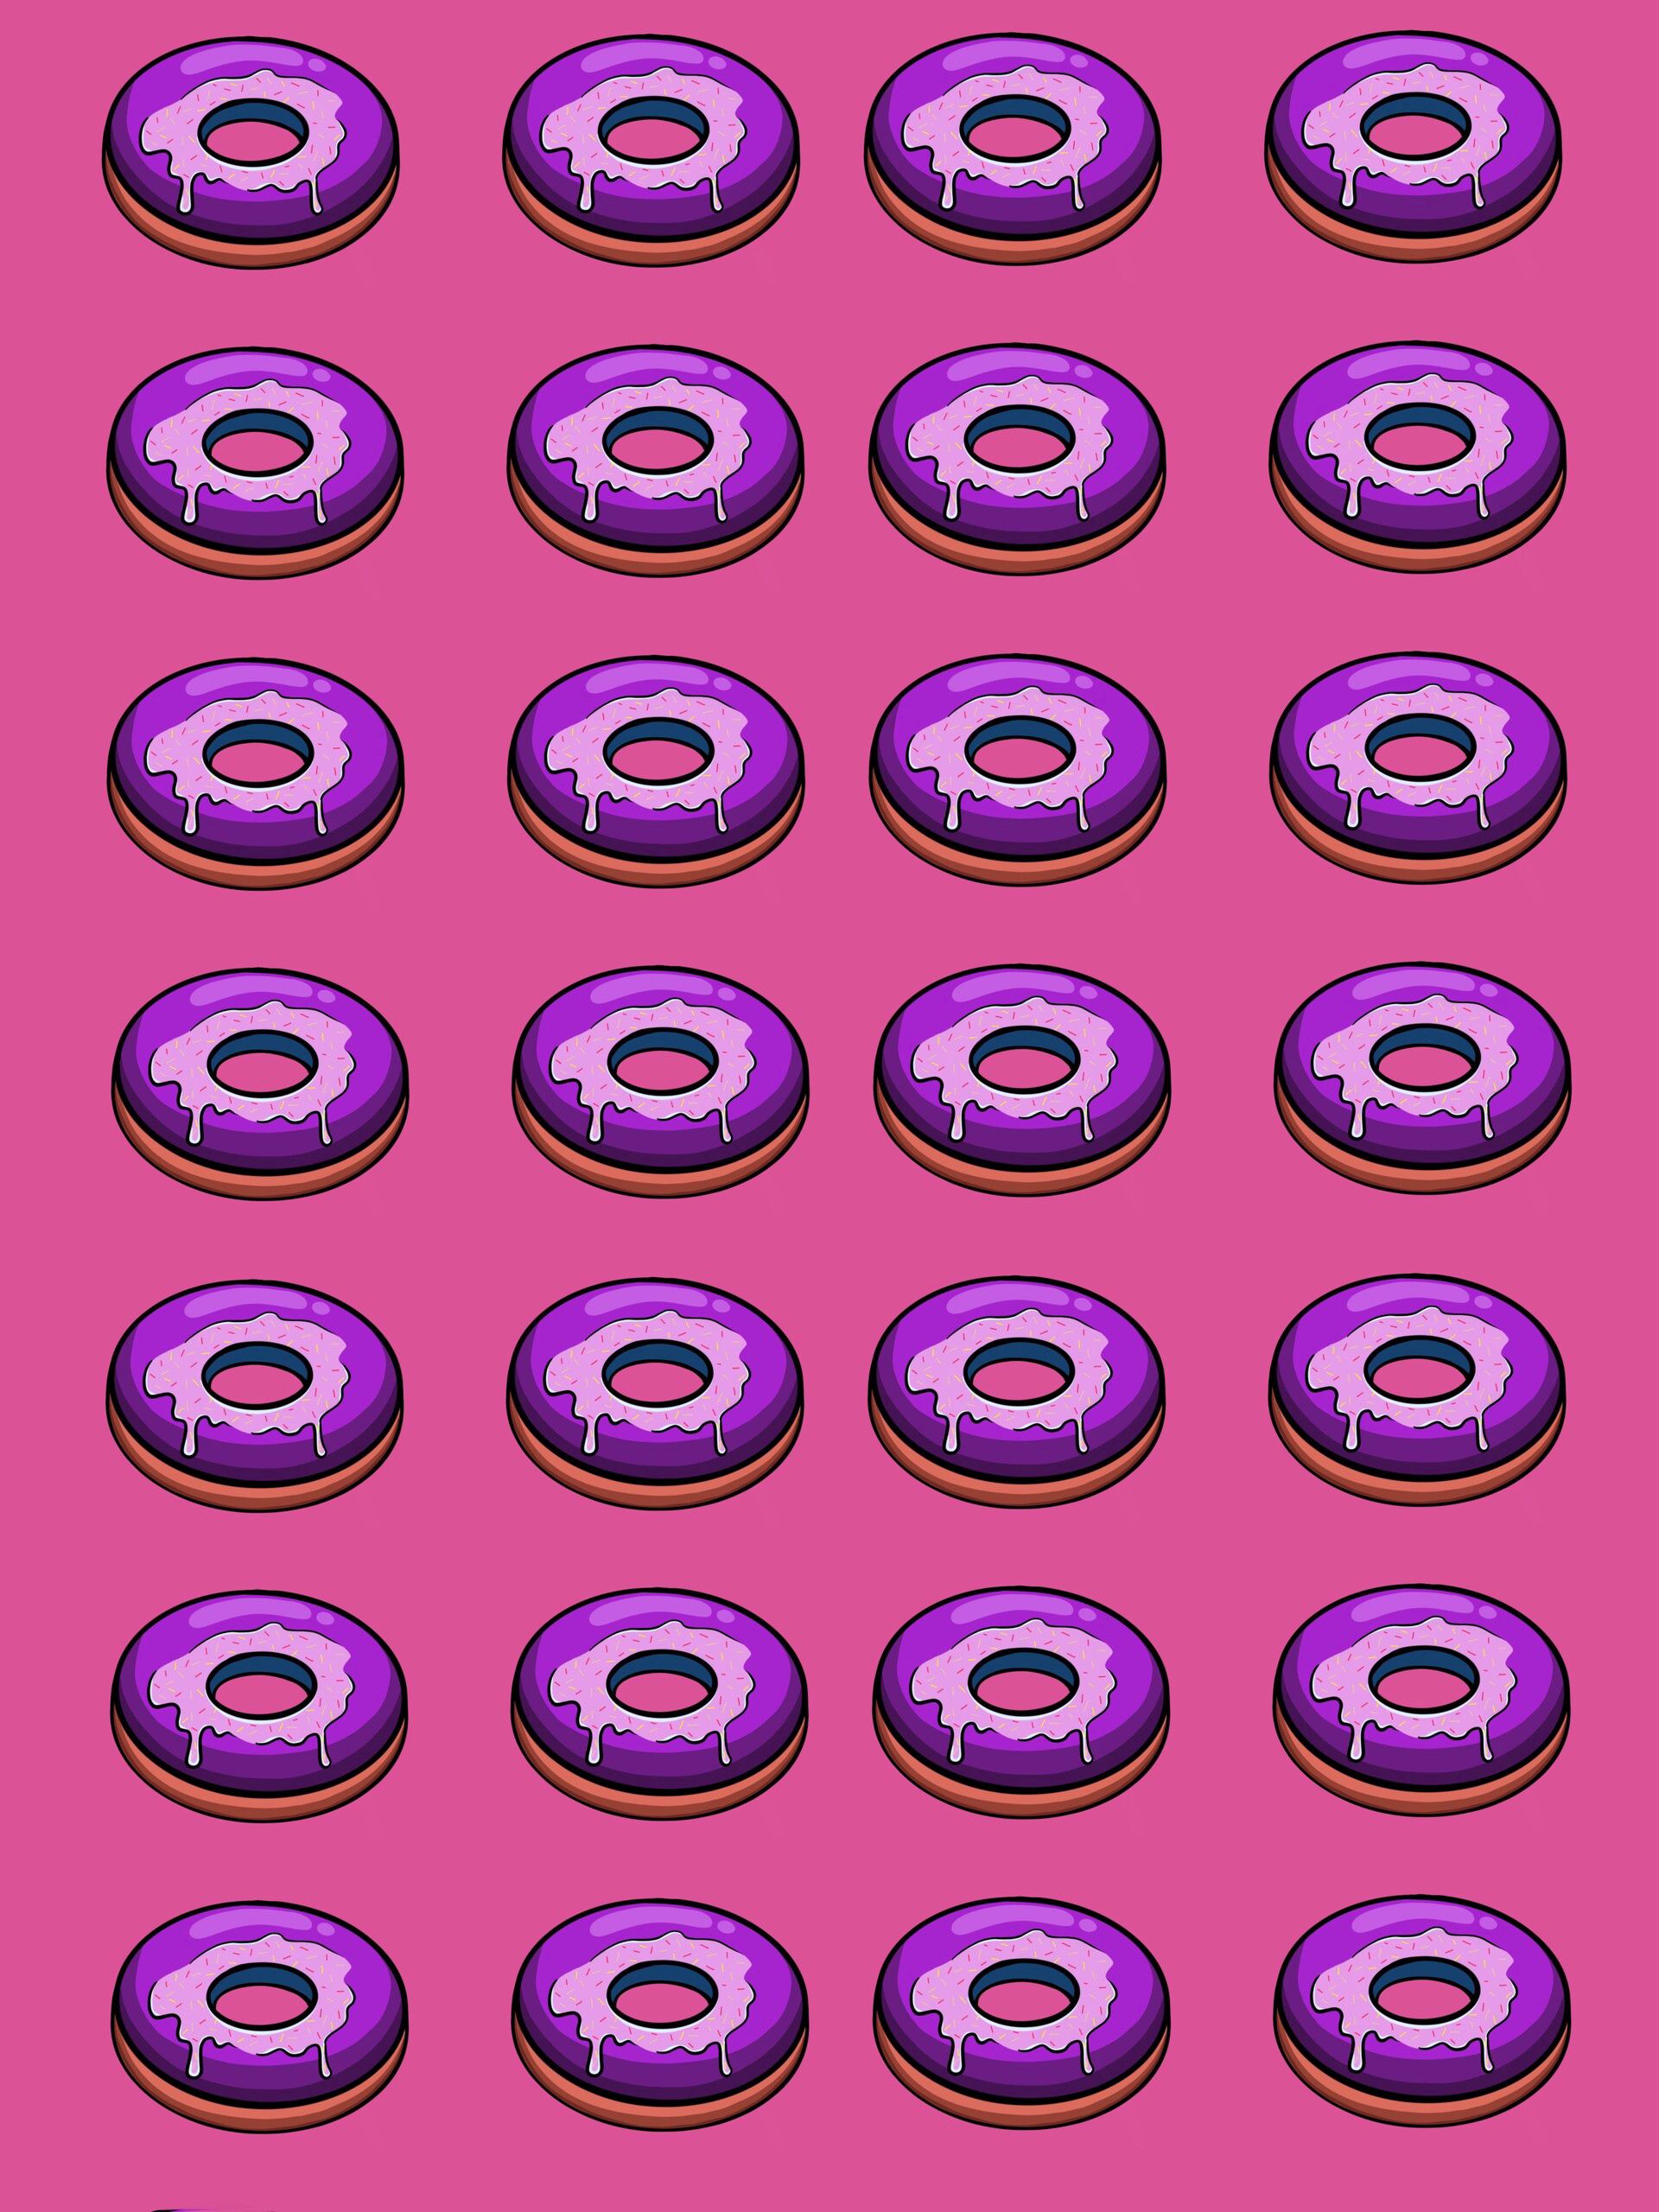 4K Phone Wallpaper donuts, textures, bakery products, sweet